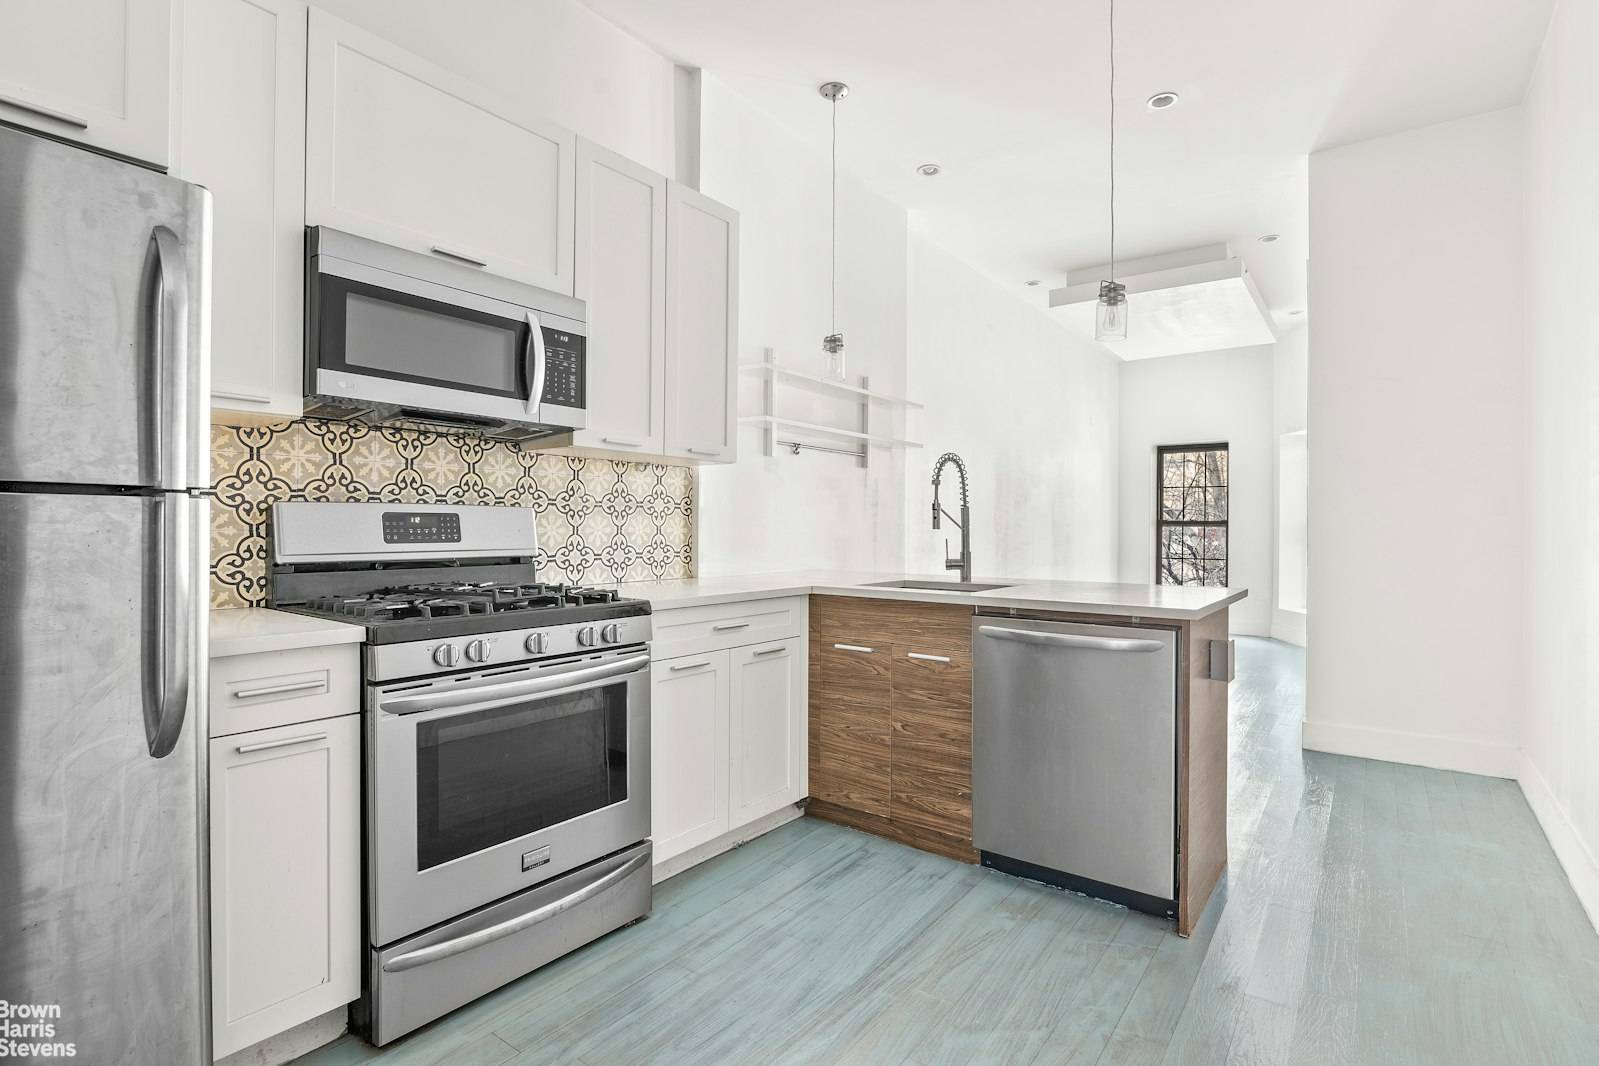 Sunny and beautiful 3 bedroom apartment near some of Bed Stuy's most popular hangouts.